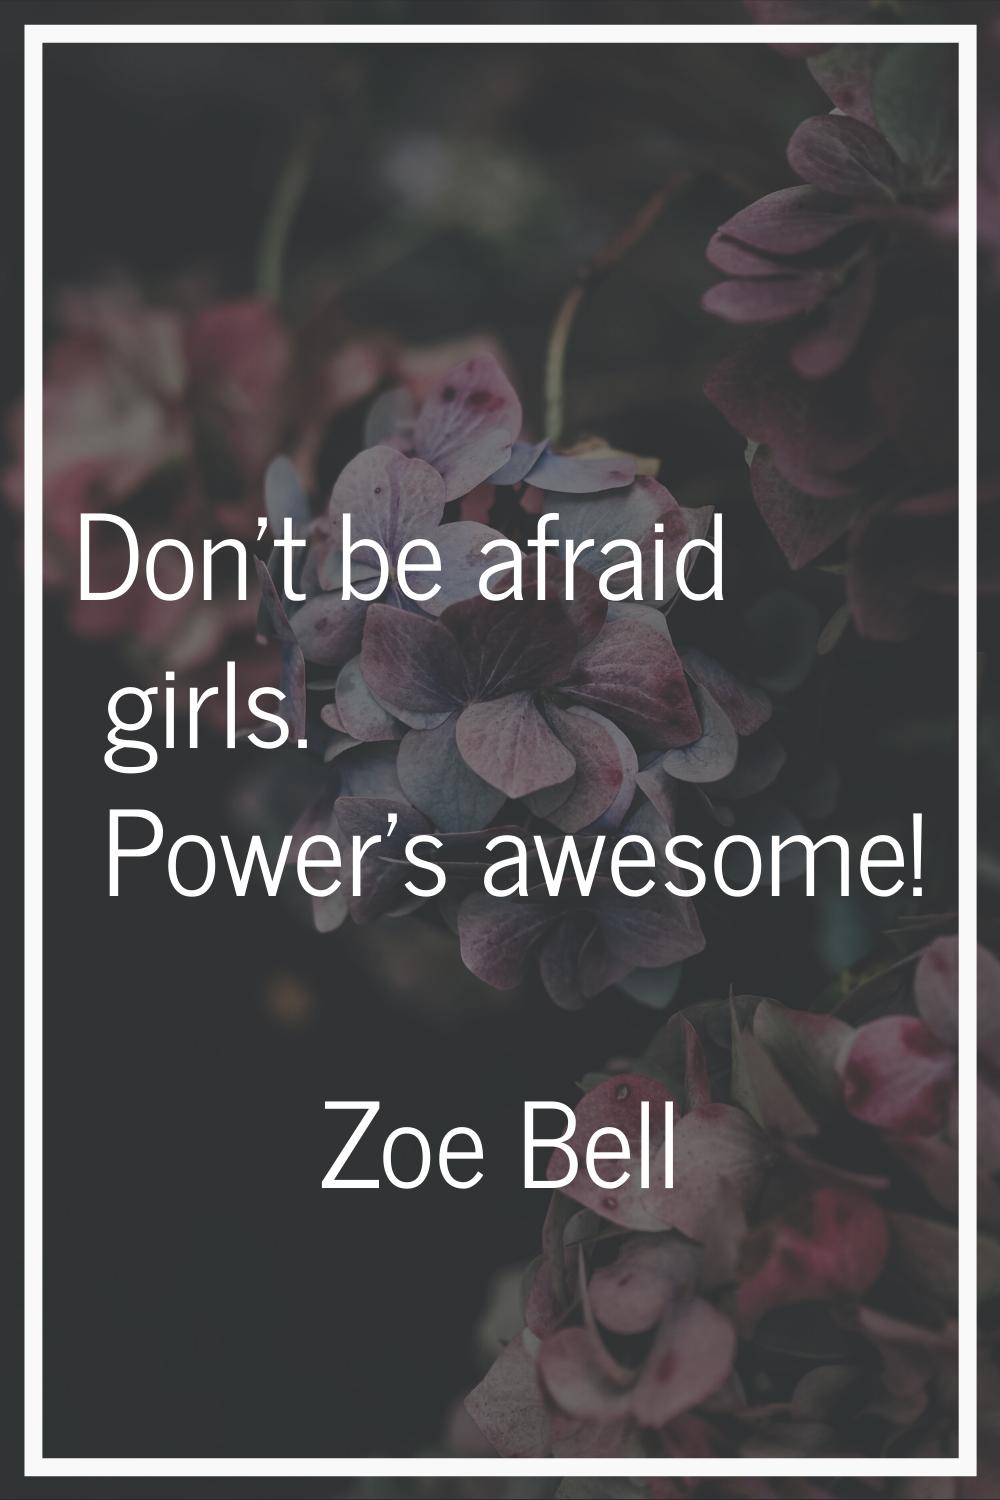 Don't be afraid girls. Power's awesome!